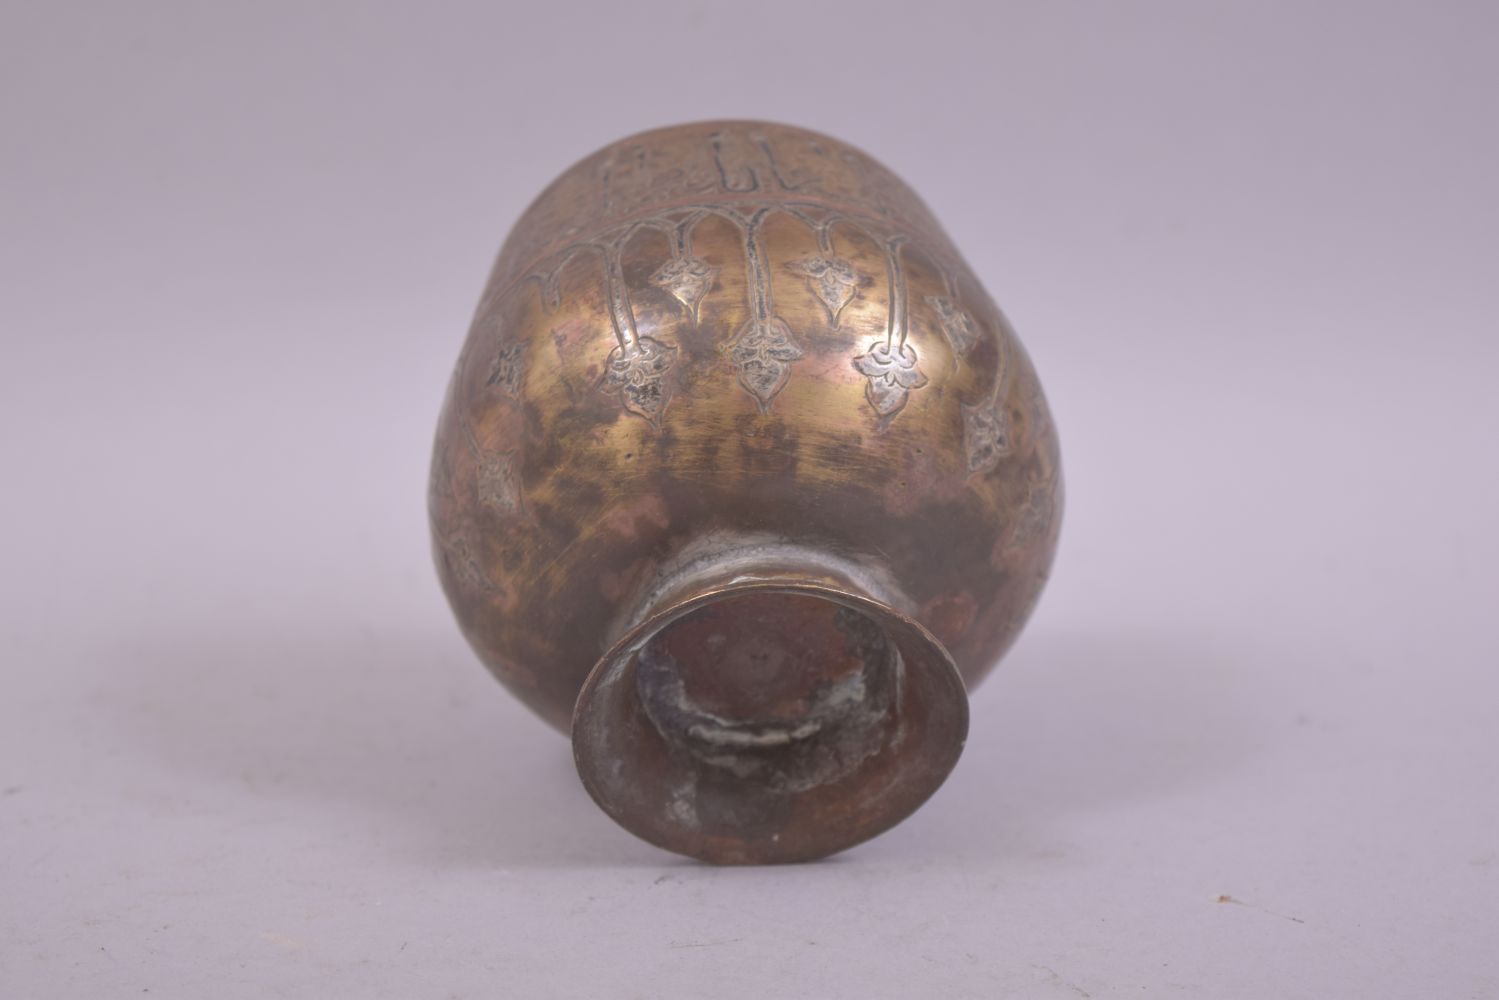 A FINE ISLAMIC SMALL BRASS SILVER AND COPPER OVERLAID GOBLET, 8.5cm high. - Image 6 of 6